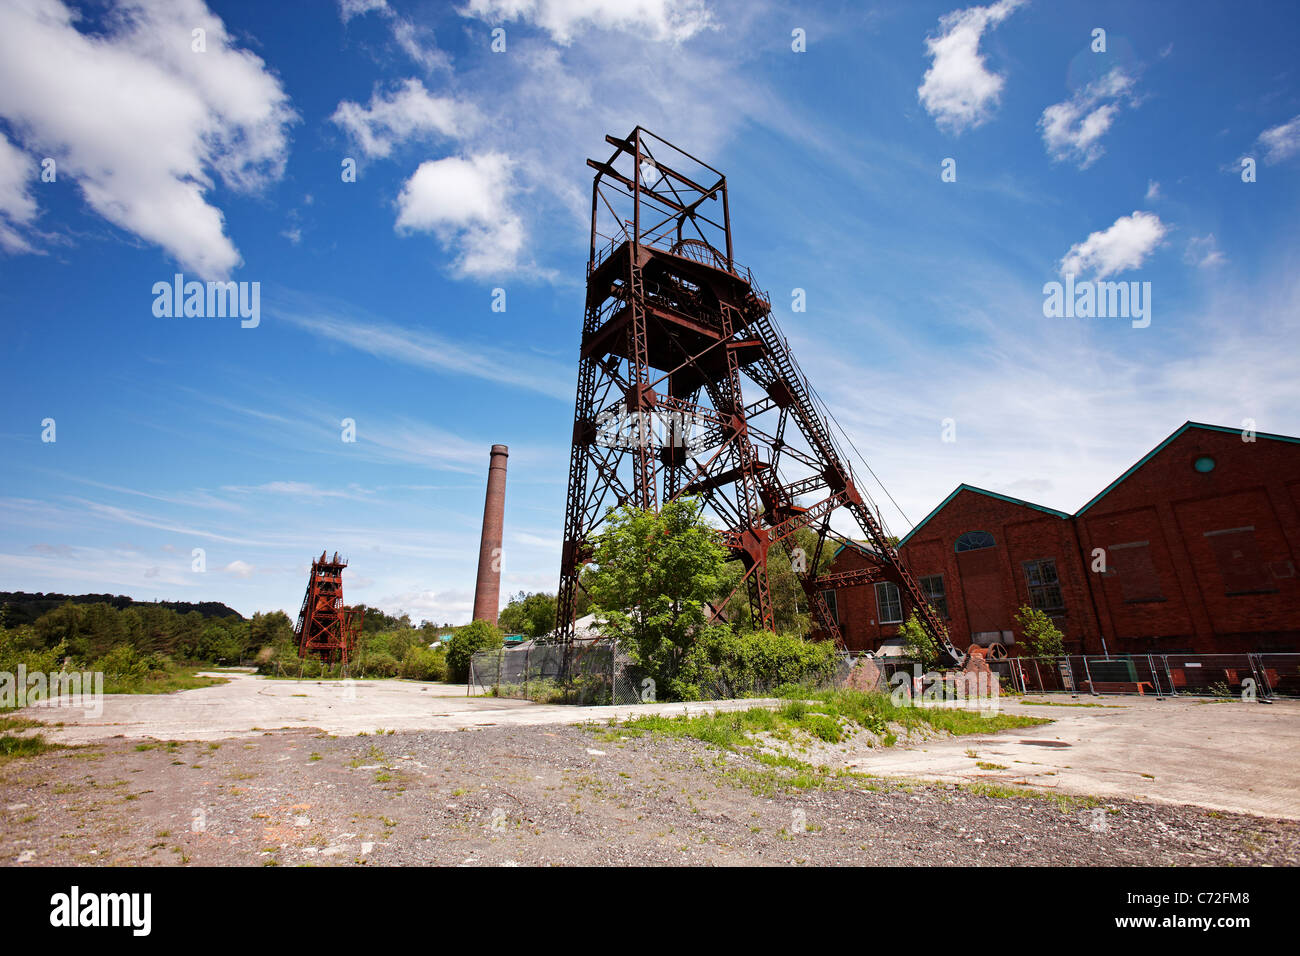 Cefn Coed Disused Colliery, South Wales, UK Stock Photo